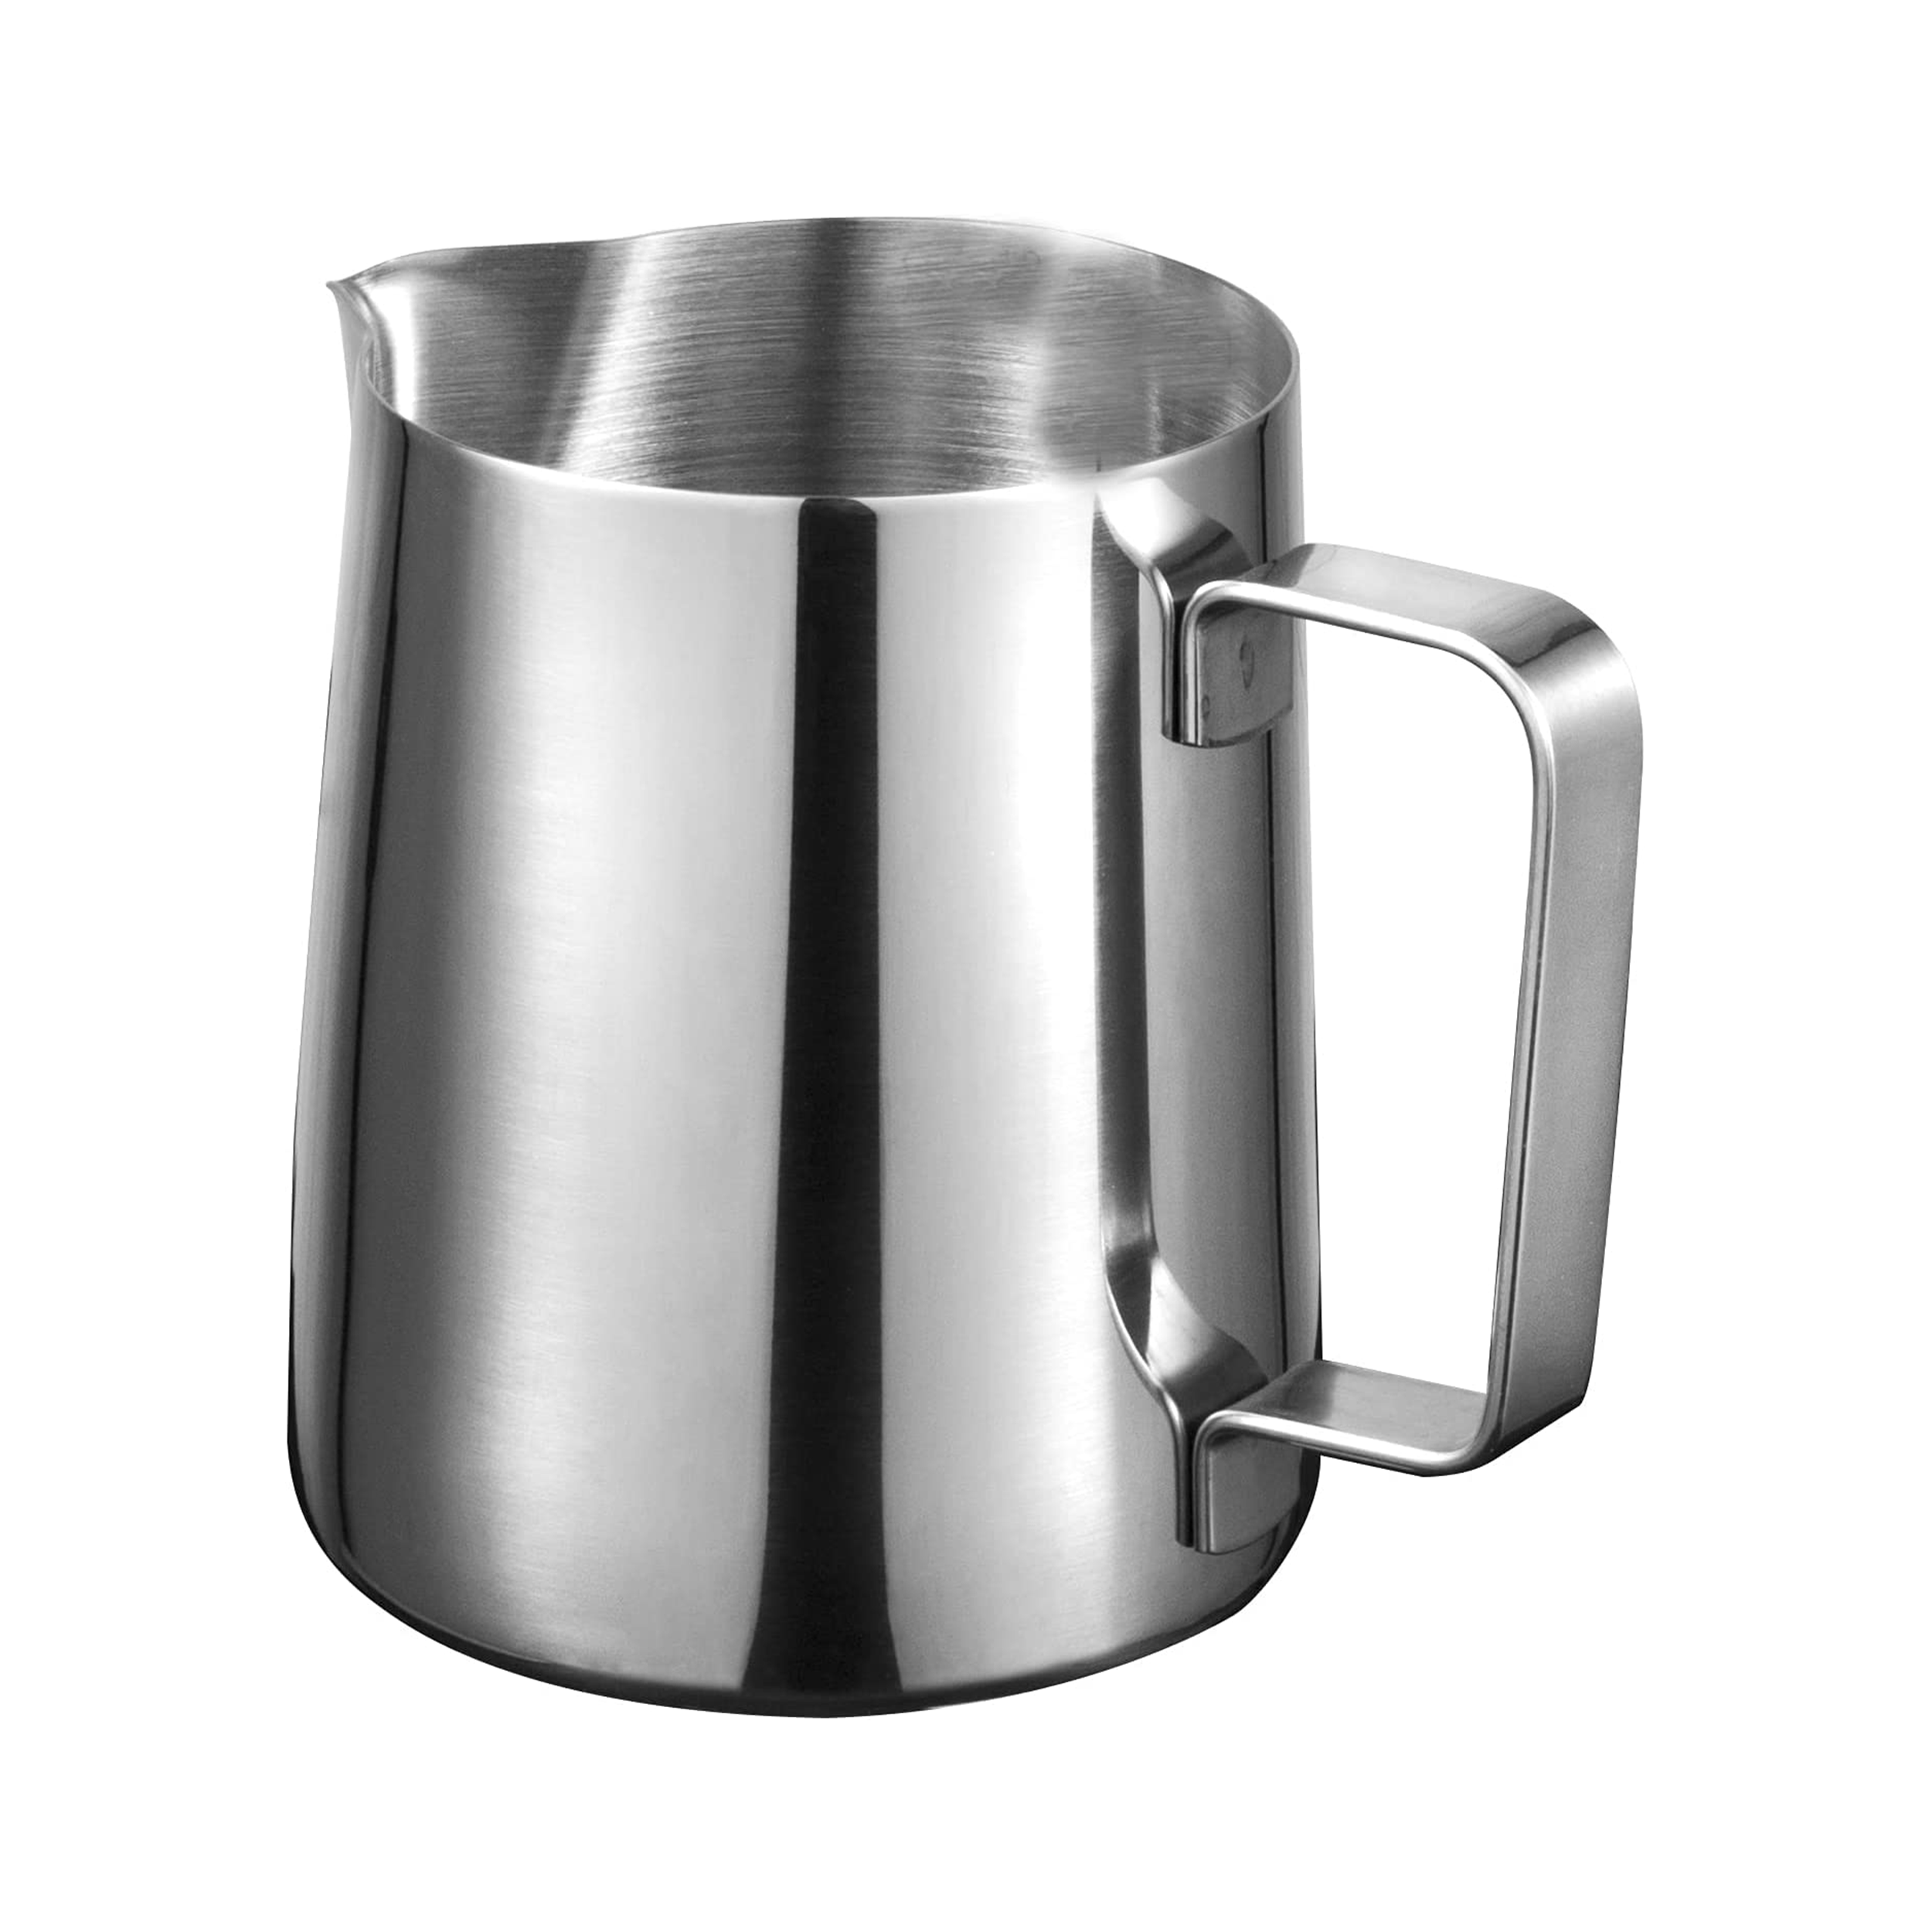 Milk Frothing Pitcher 900ml - Stainless Steel